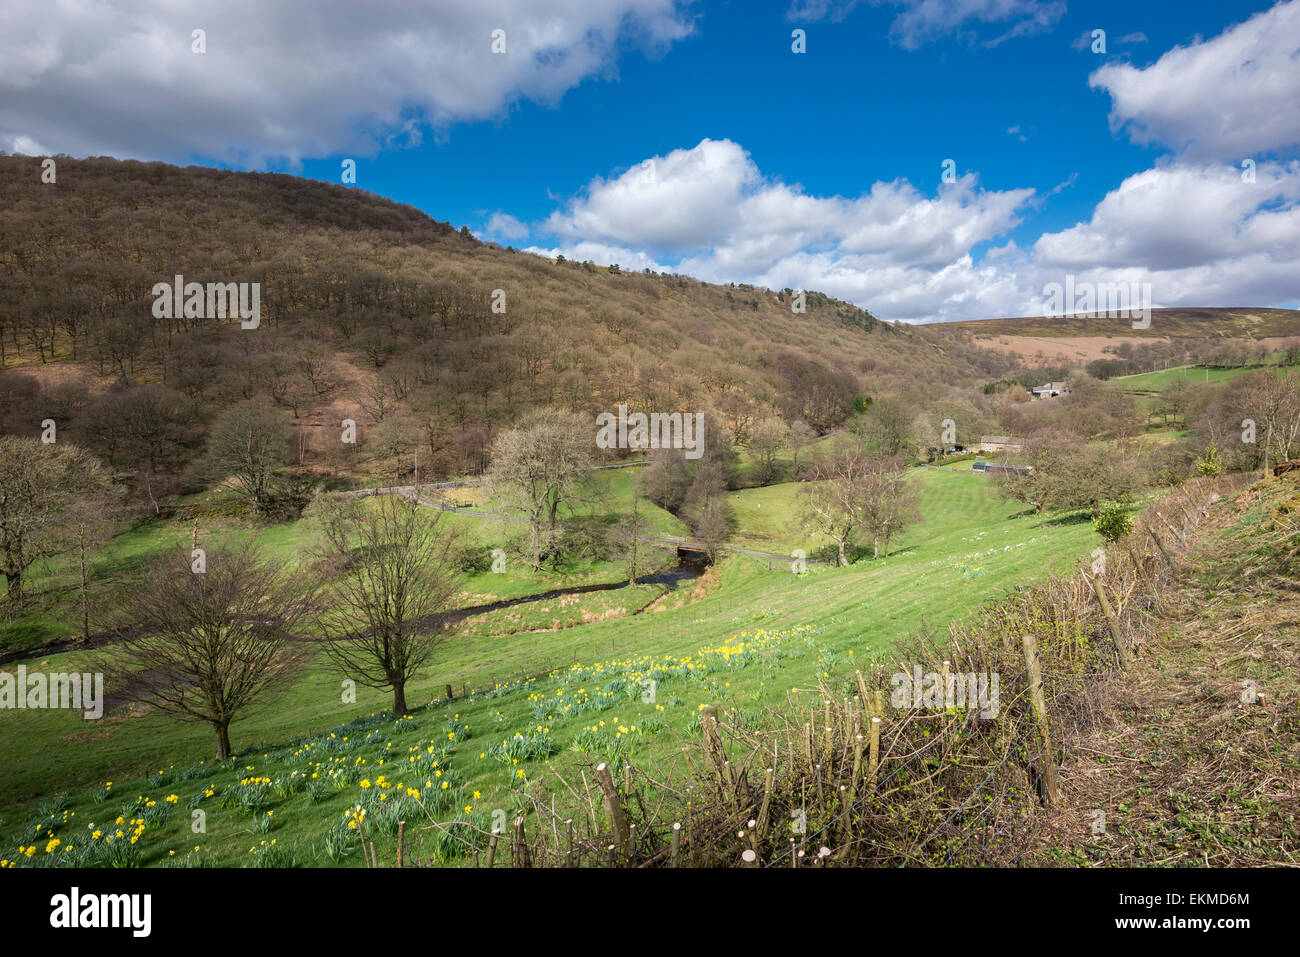 Rural scene near the village of Hayfield in the Peak District, Derbyshire. Daffodils flowering in the spring sunshine. Stock Photo